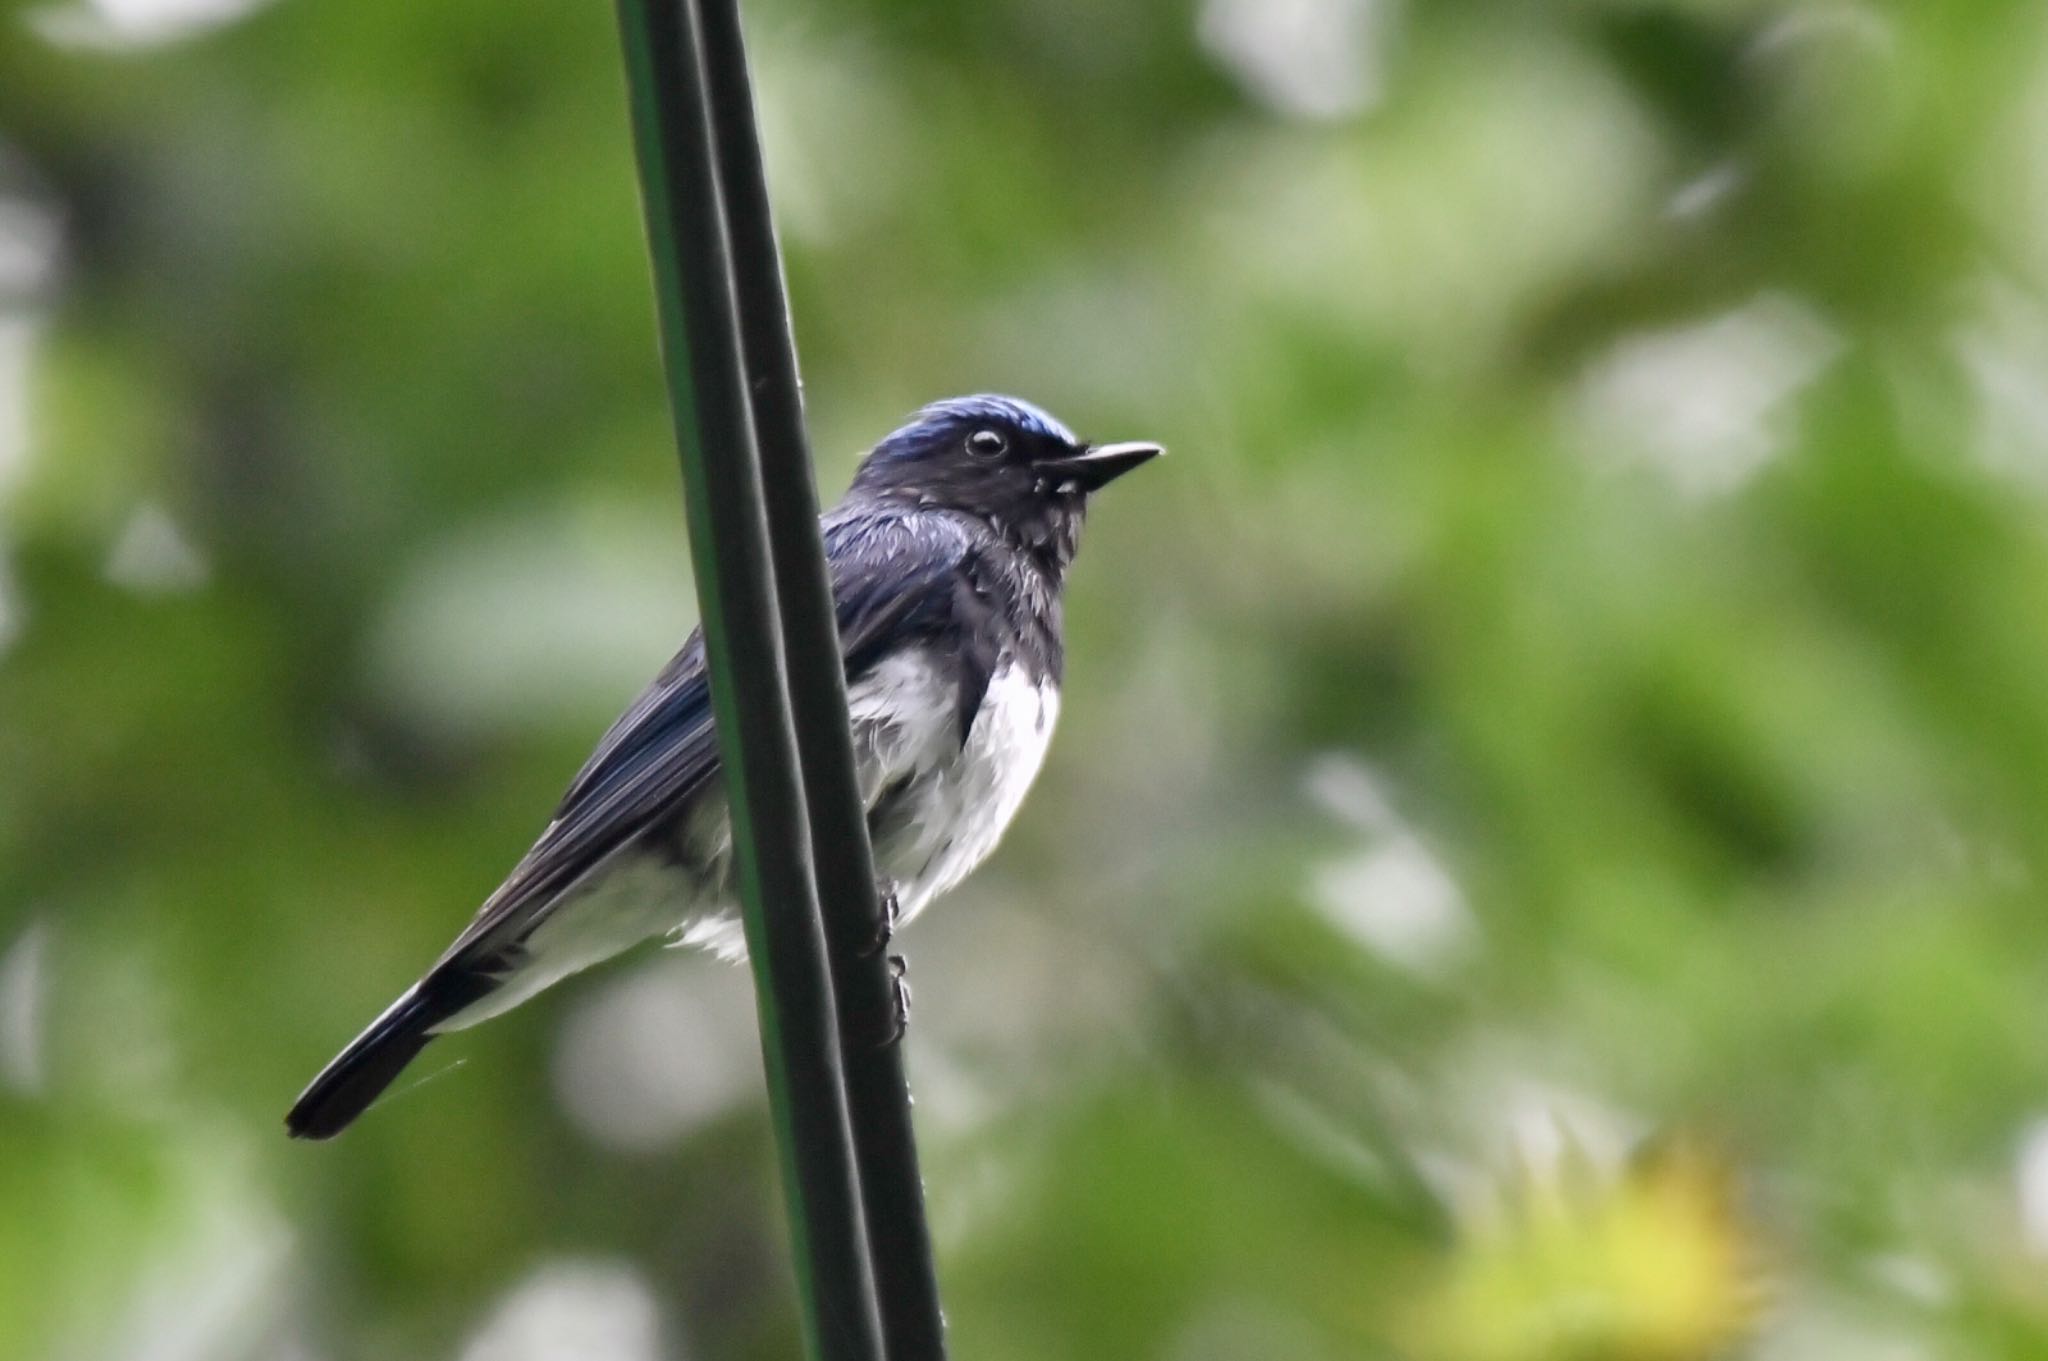 Photo of Blue-and-white Flycatcher at 油山市民の森 by にょろちょろ